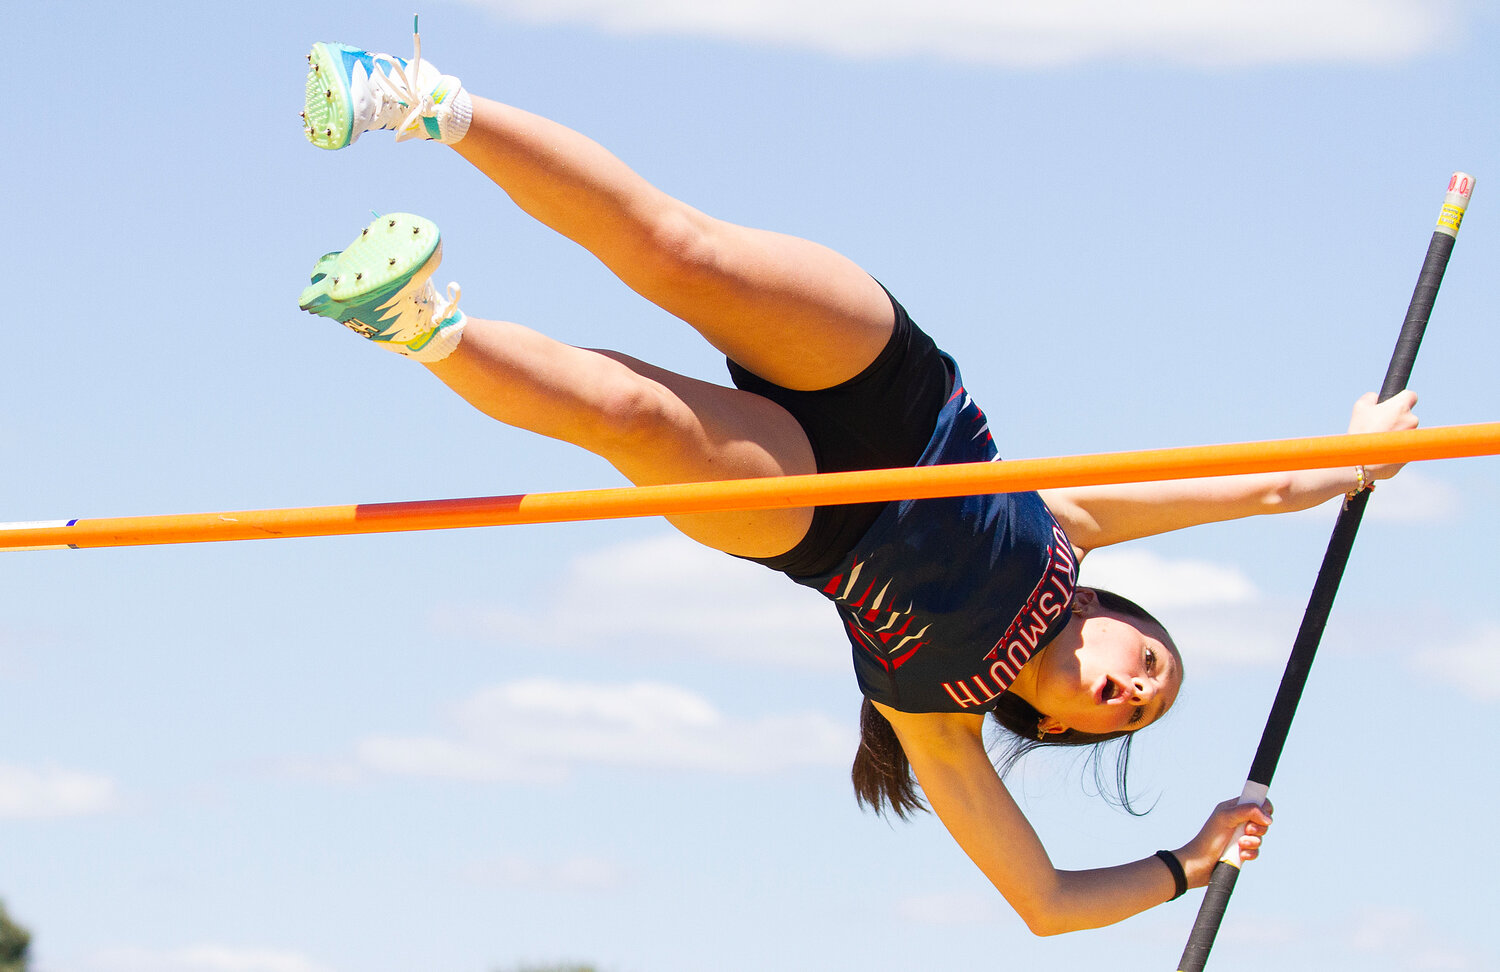 Rowan Snyder placed second in the girls’ pole vault with a best effort of 8 feet, 6 inches.